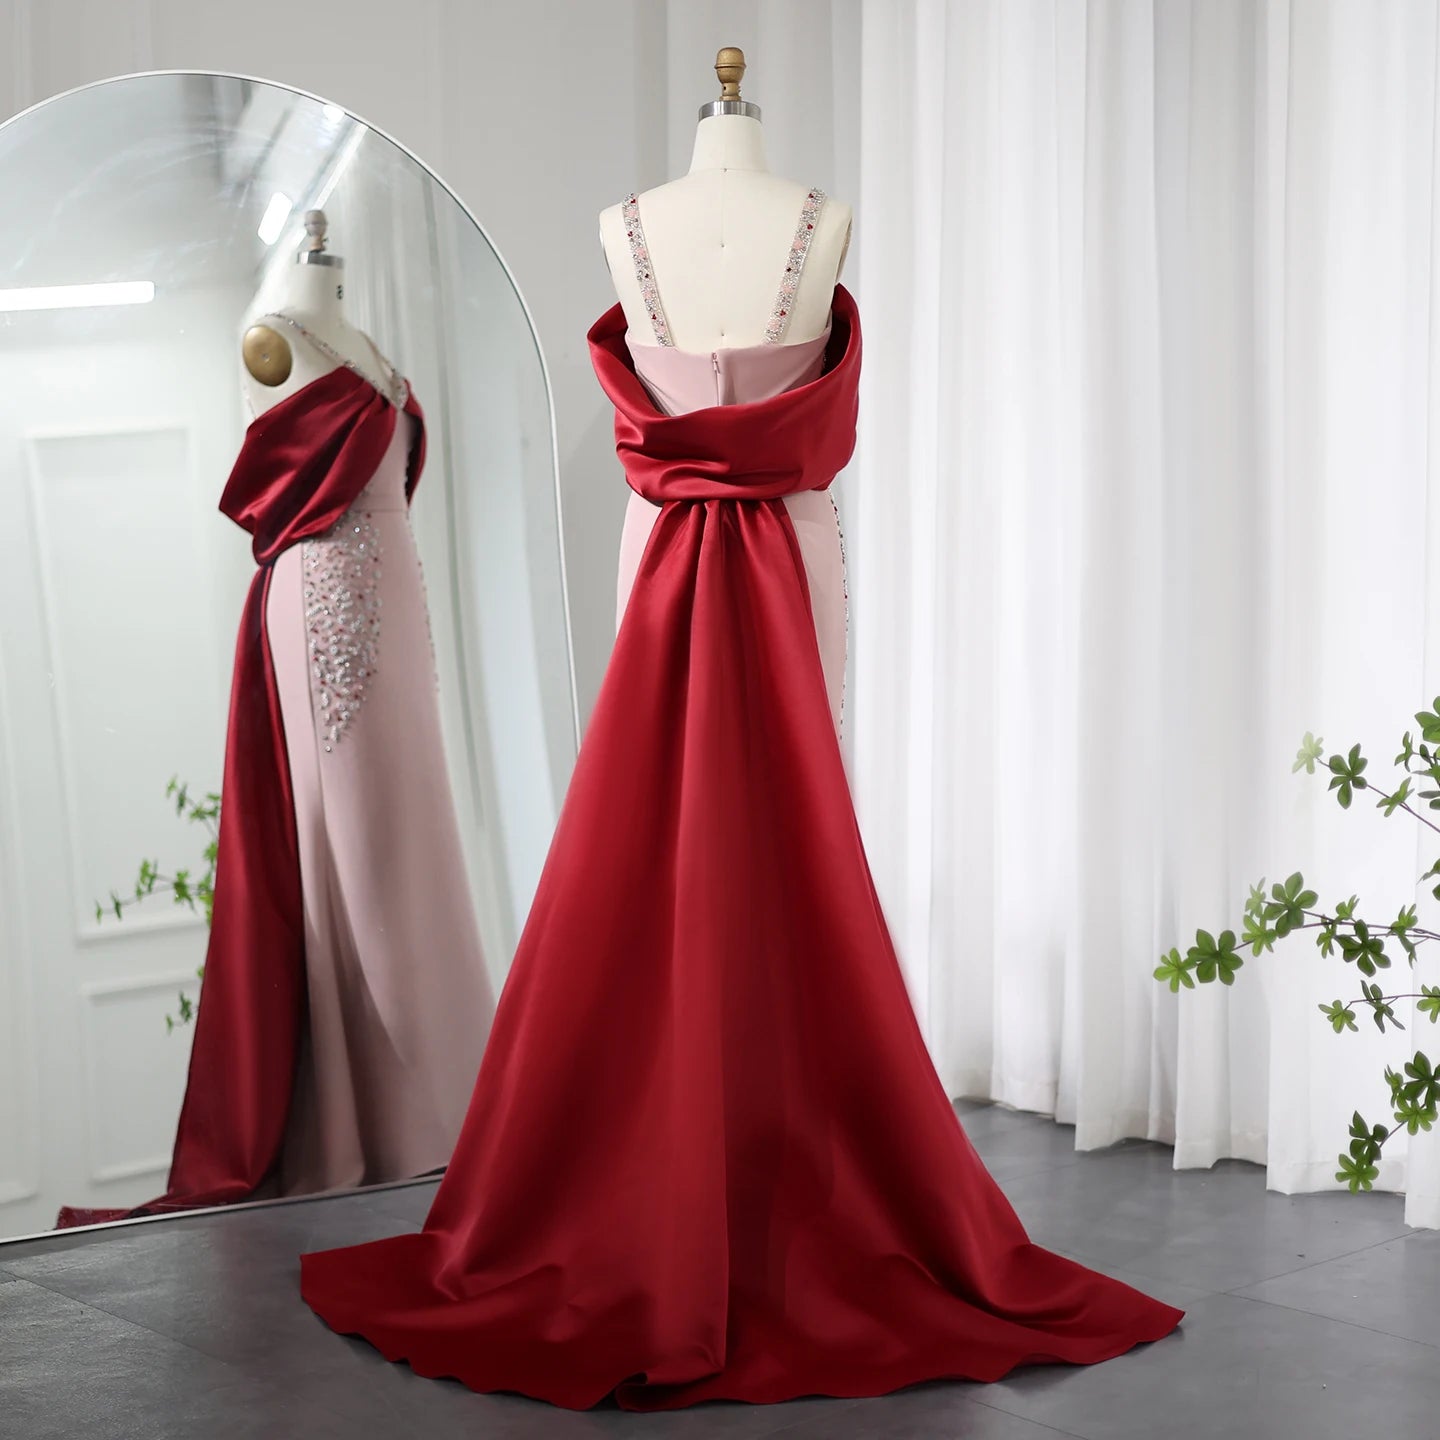 Luxury Embellished Floor-Length Dress with Cape